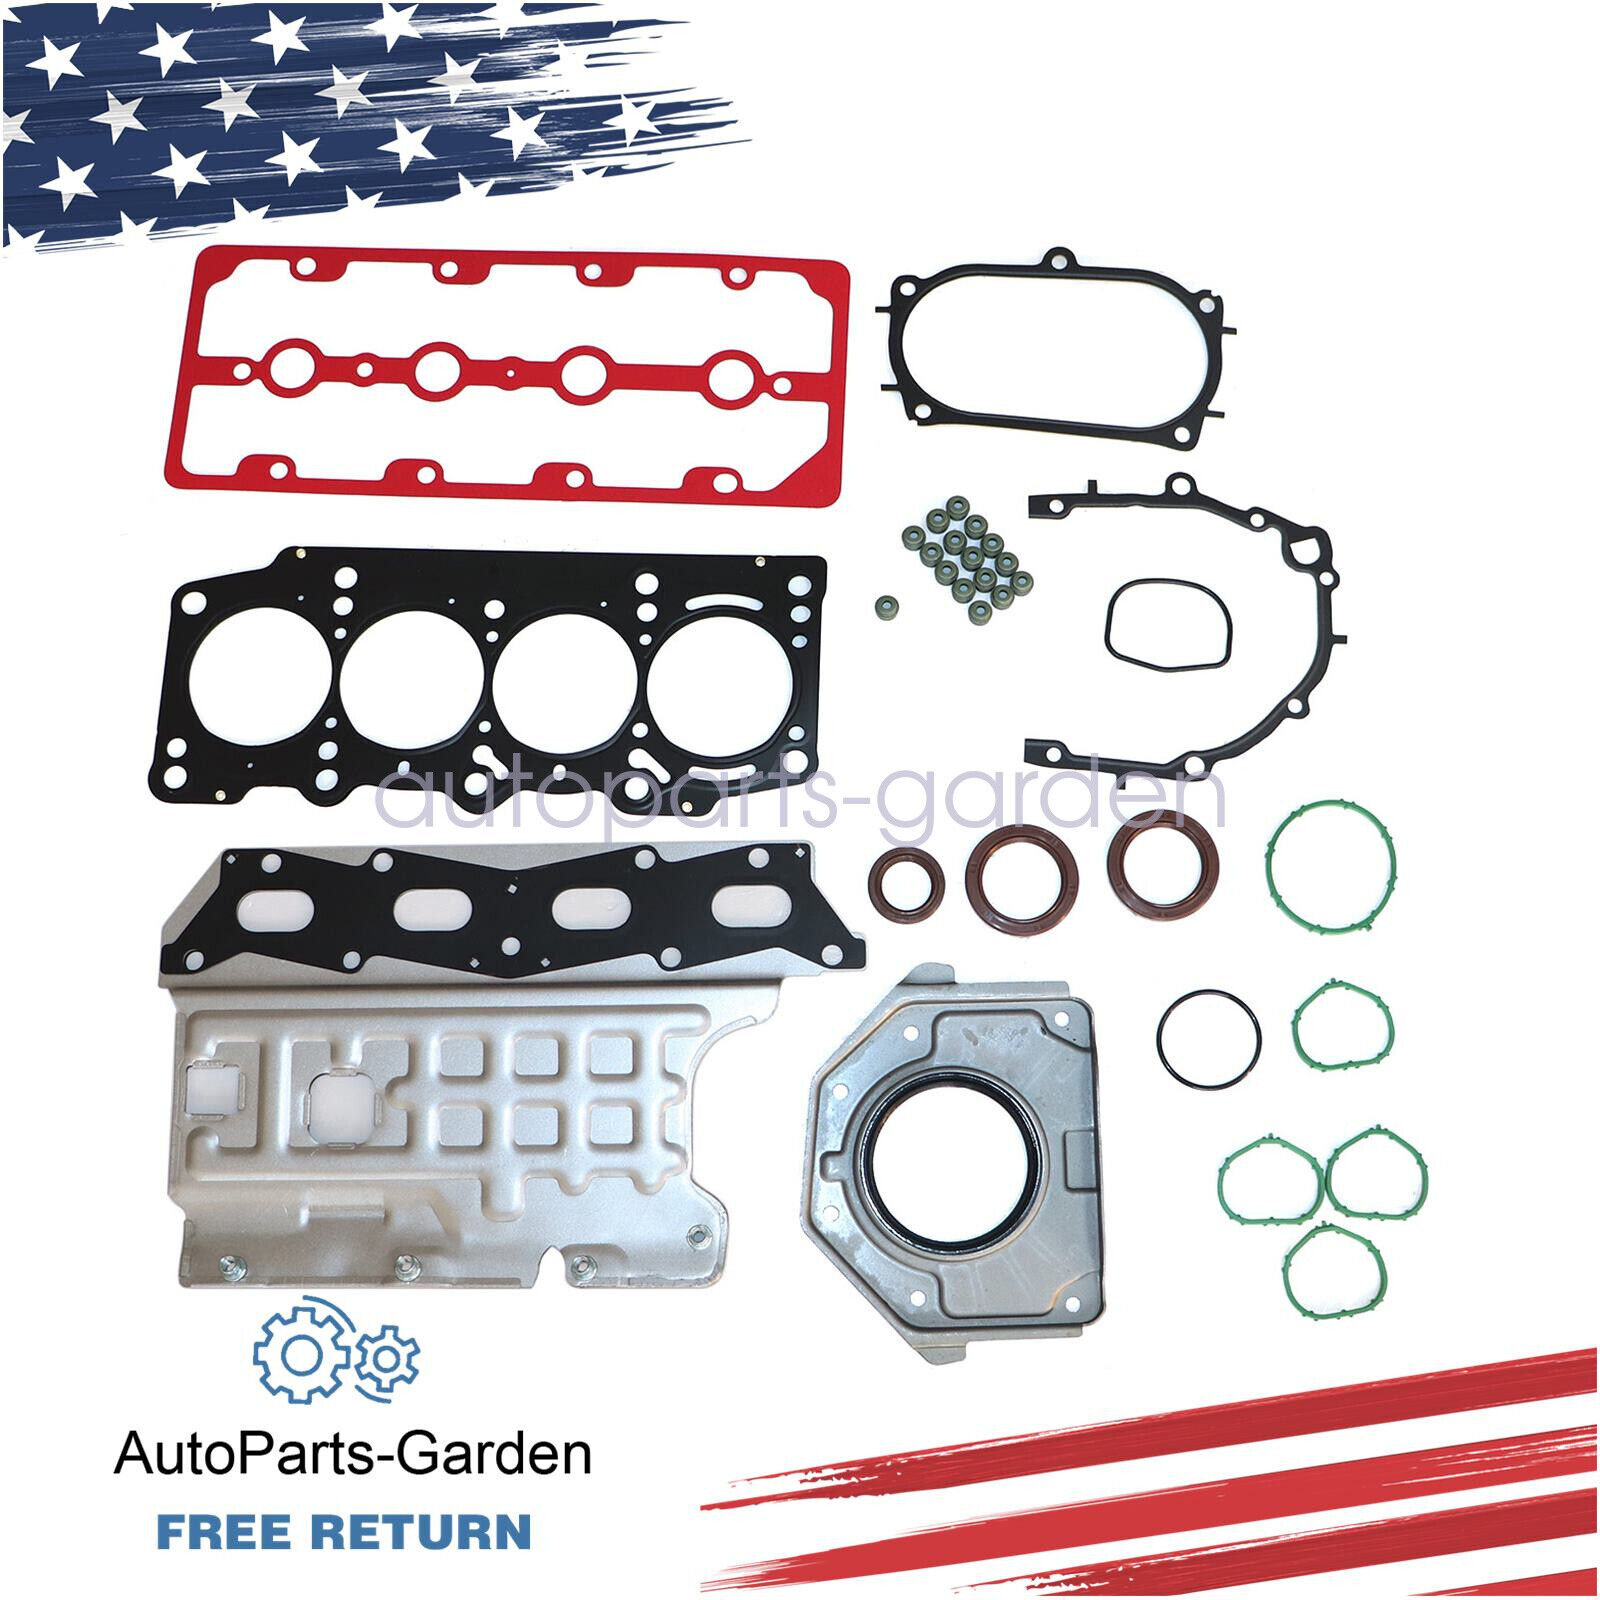 New Cylinder Head Gasket Set Fits For FIAT Abarth 500 1.4L (with head gasket)